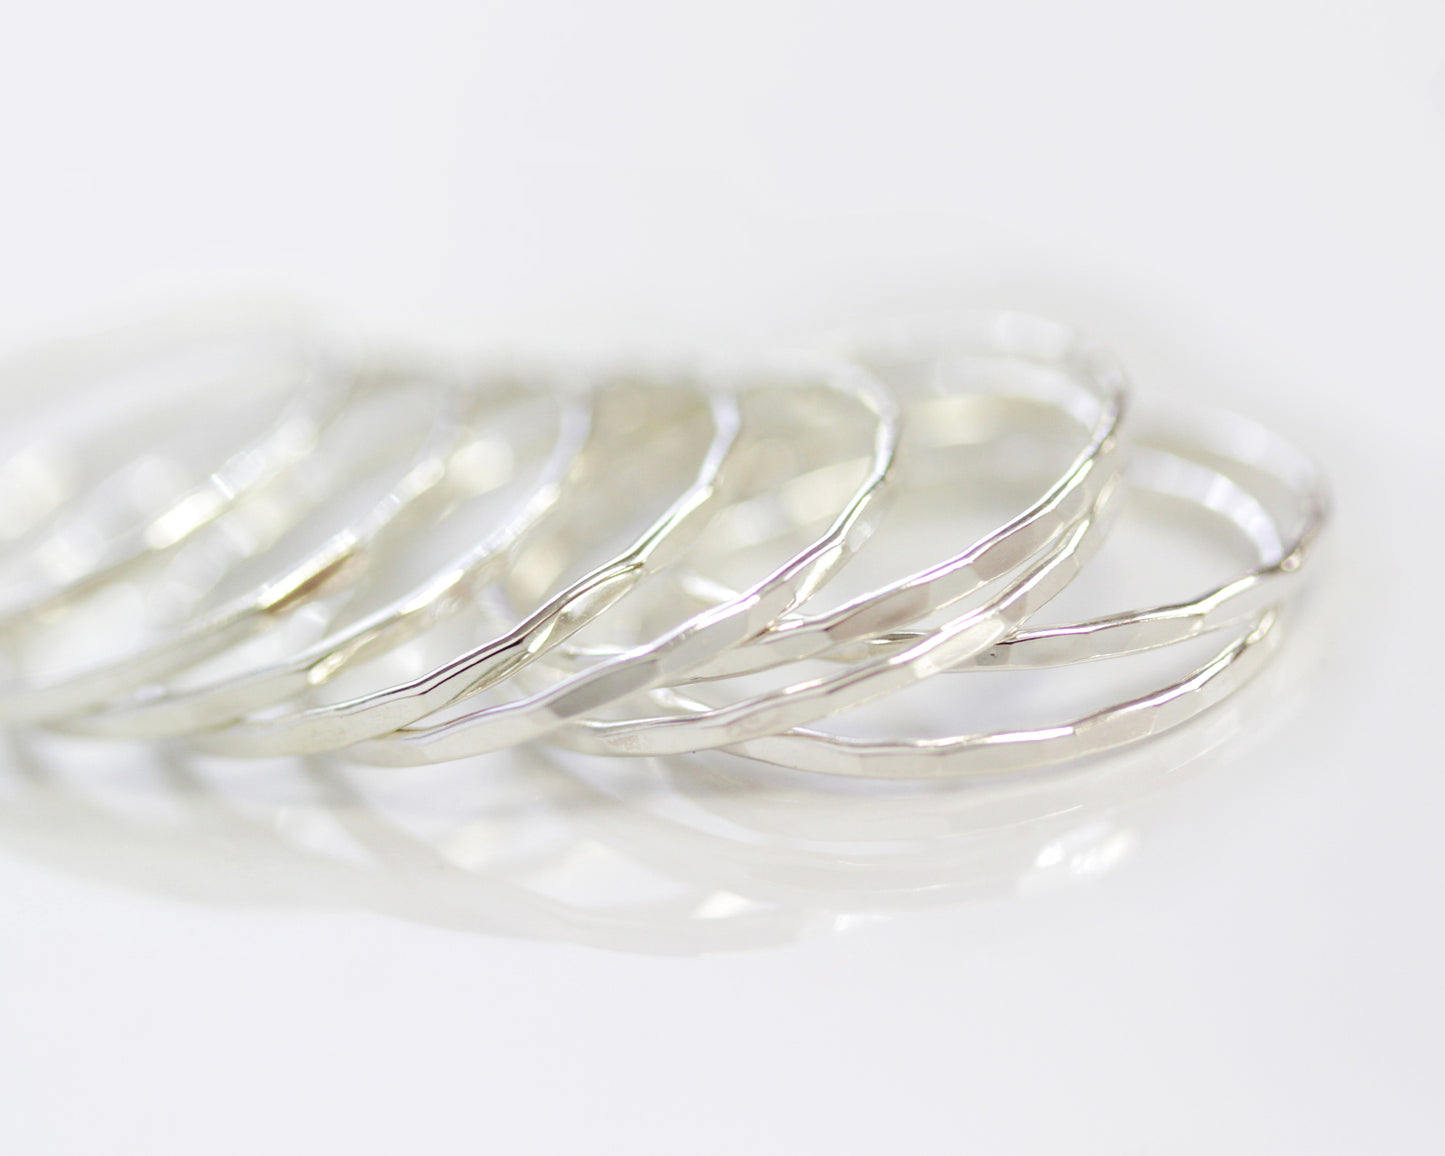 Ultra Thin Delicate Sterling Silver Stacking Rings